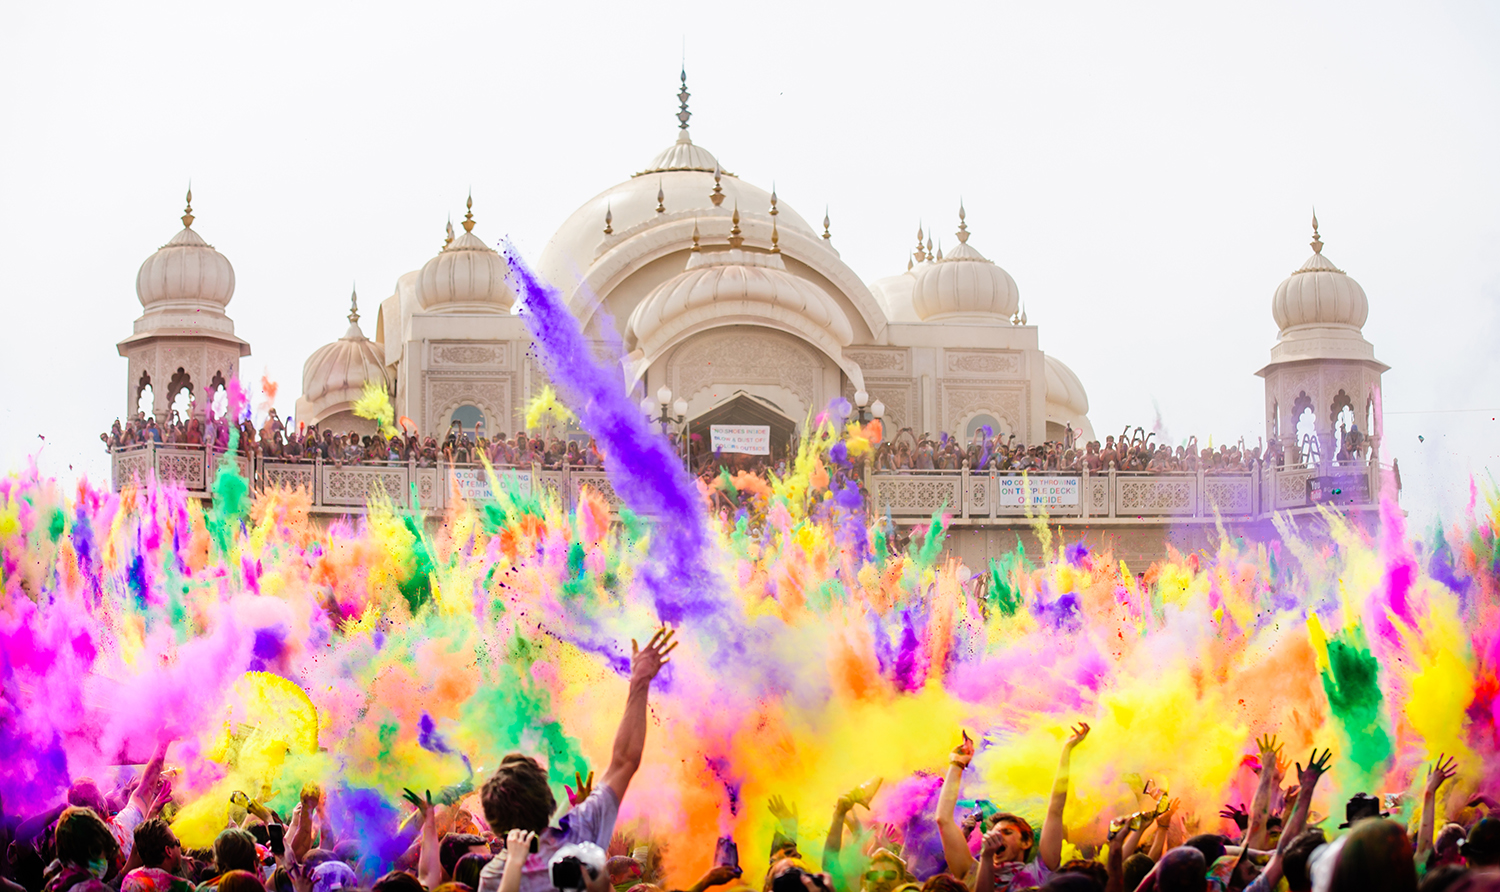 The Hindu tradition of Holi is one of the many festivals that has been adopted by many Americans. The recognizable throwing of color is now found in events and festivals across the U.S. Courtesy photo